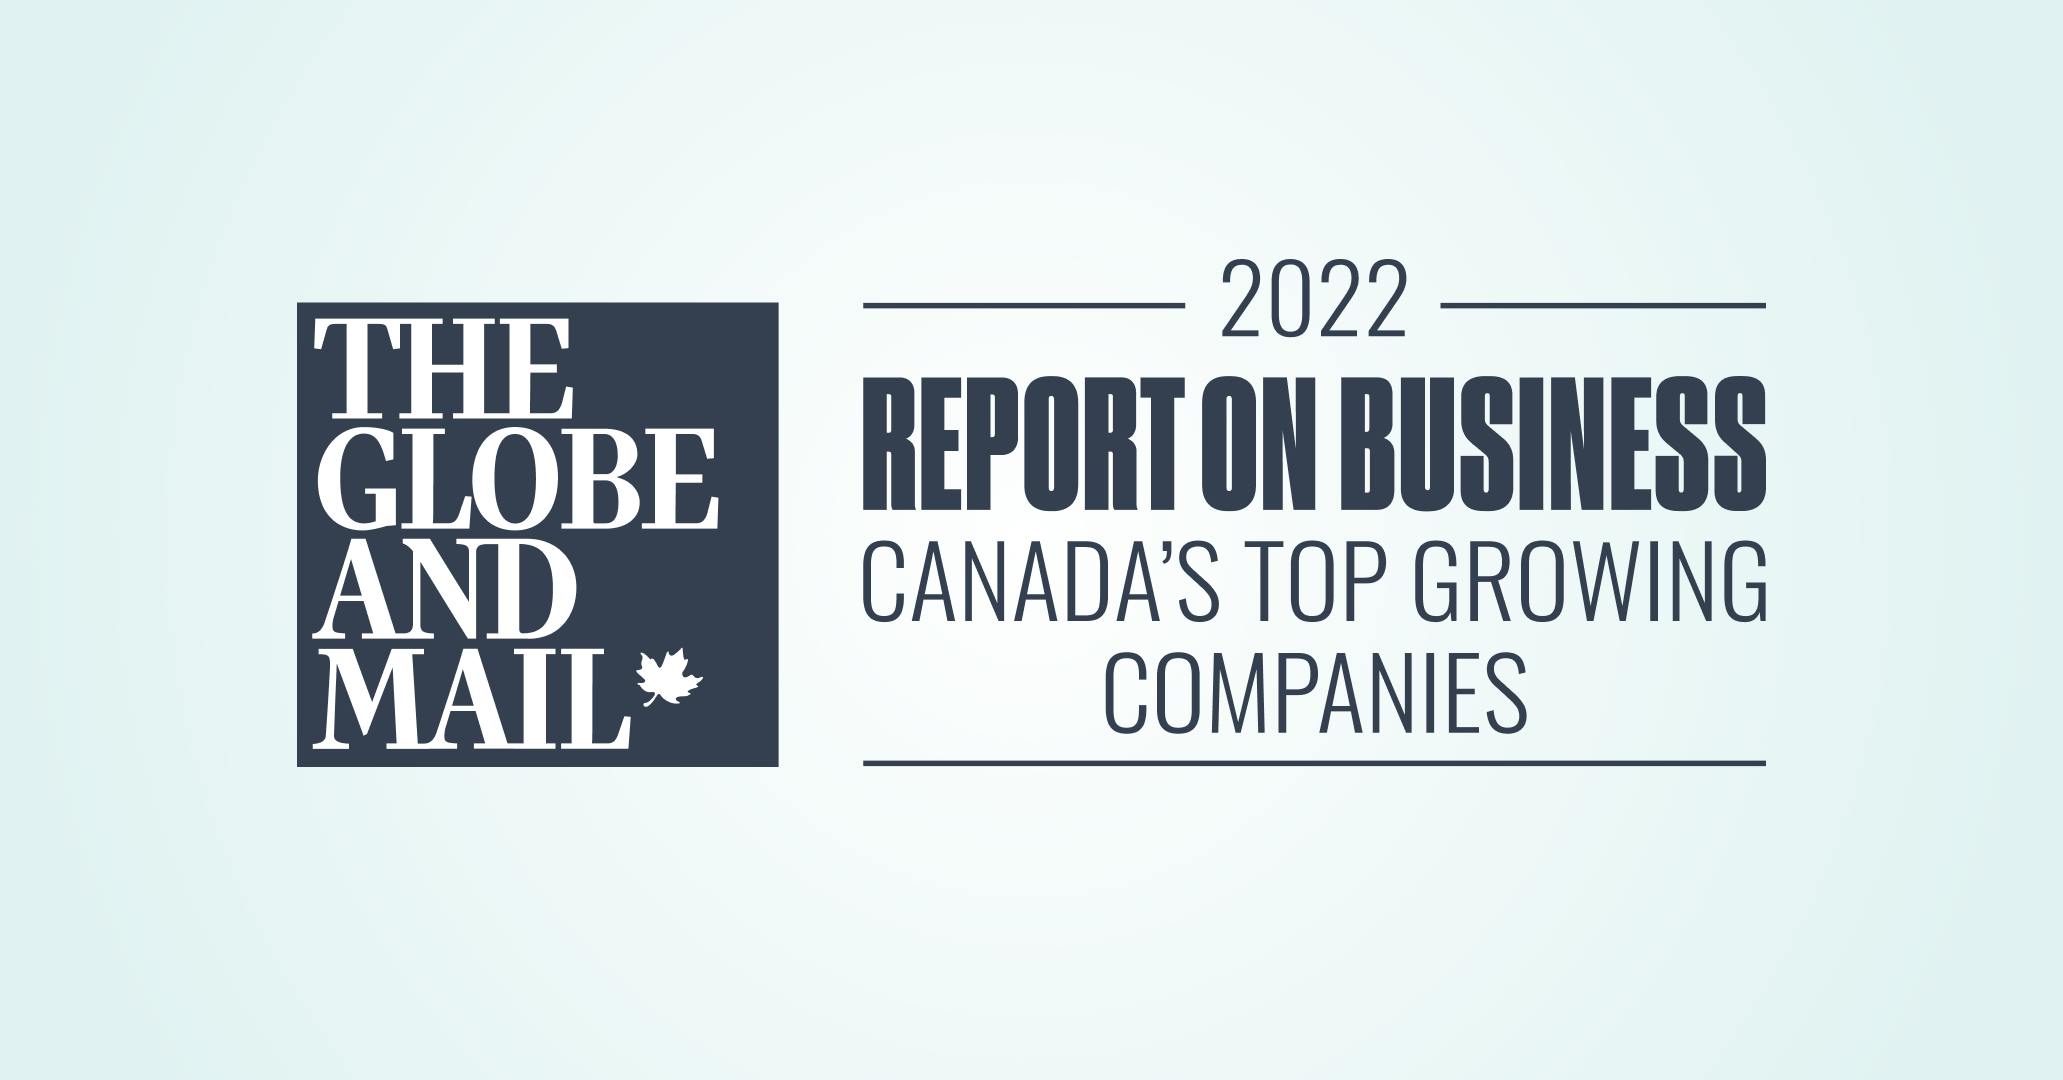 We are one of Canada's 2022 Top Growing Companies